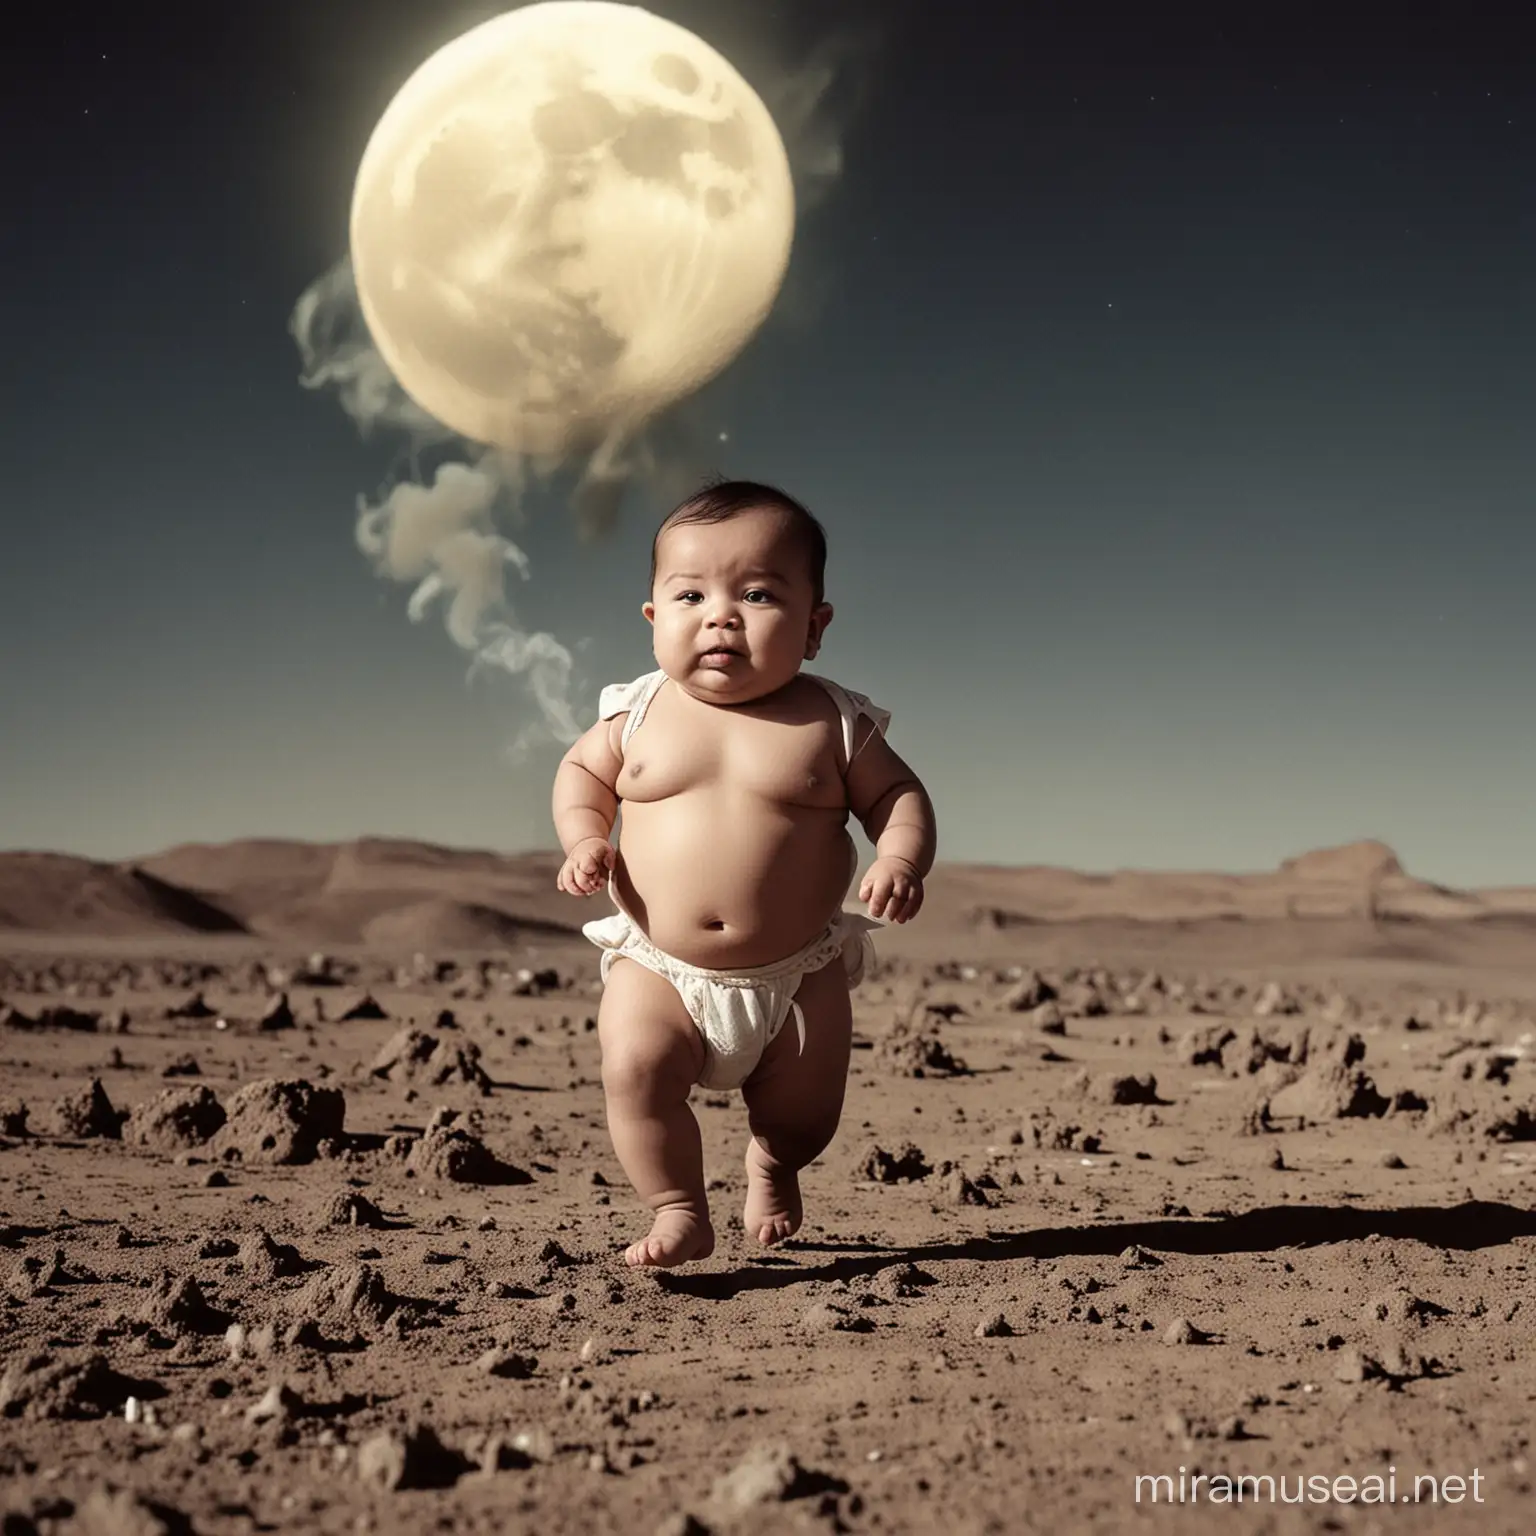 Chubby Indian Toddler Running and Smoking on the Moon